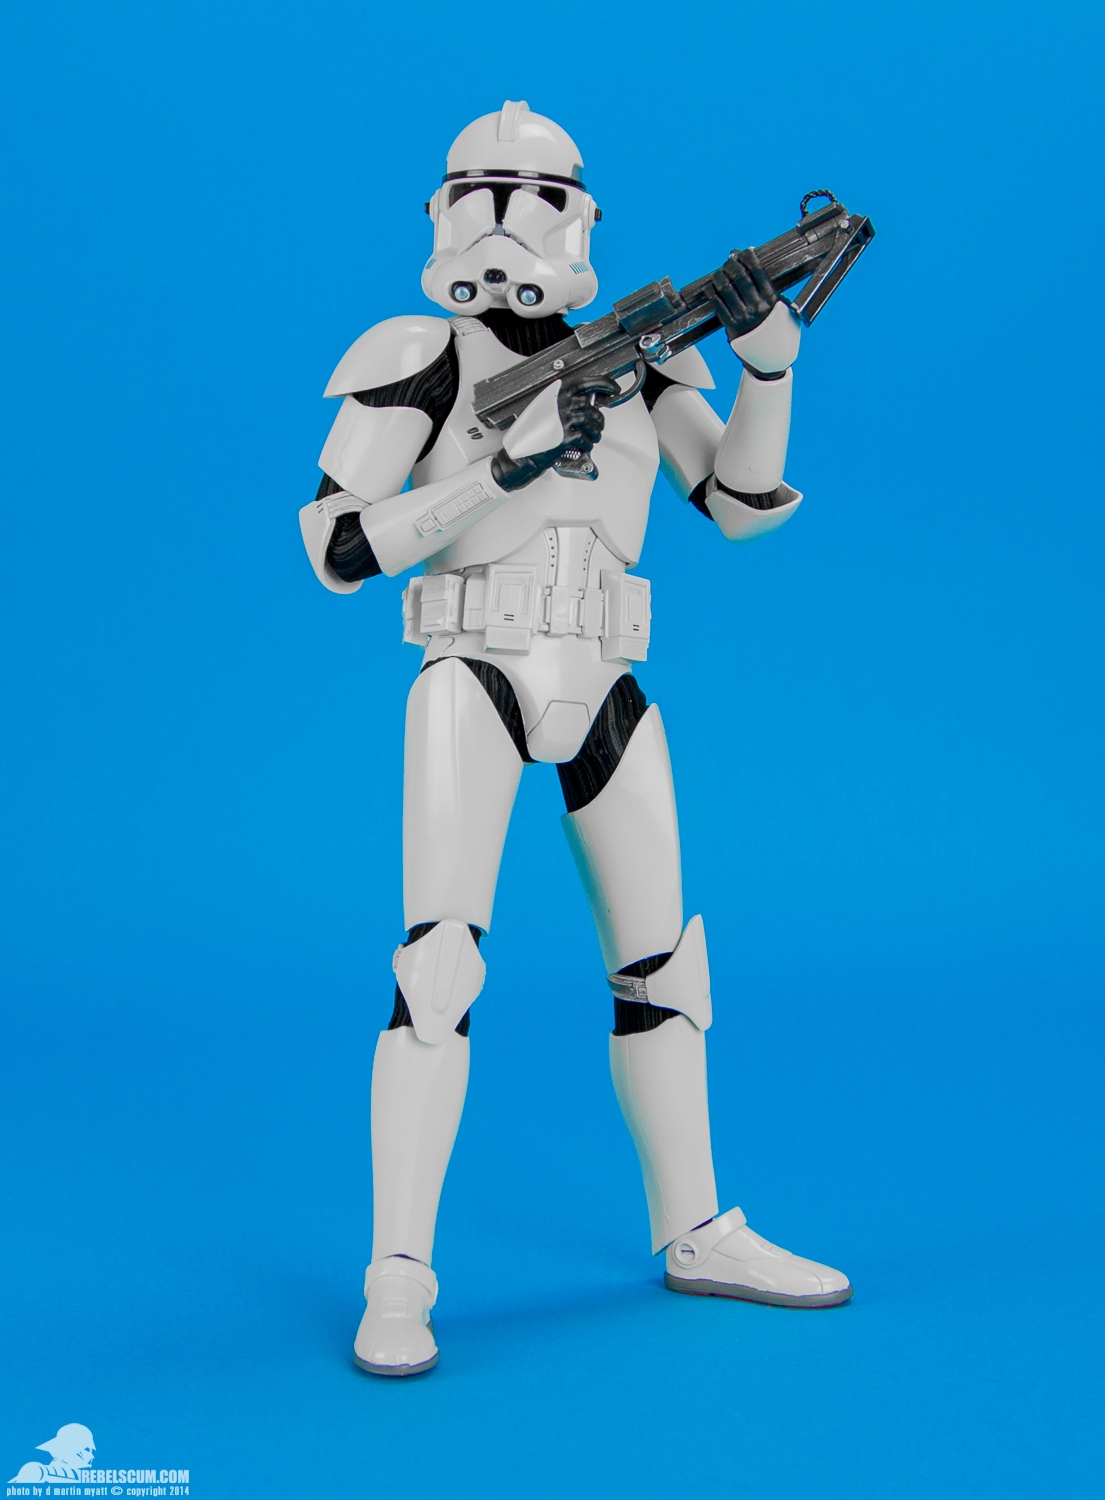 Shiny-Clone-Trooper-Deluxe-Sixth-Scale-Figure-Sideshow-021.jpg